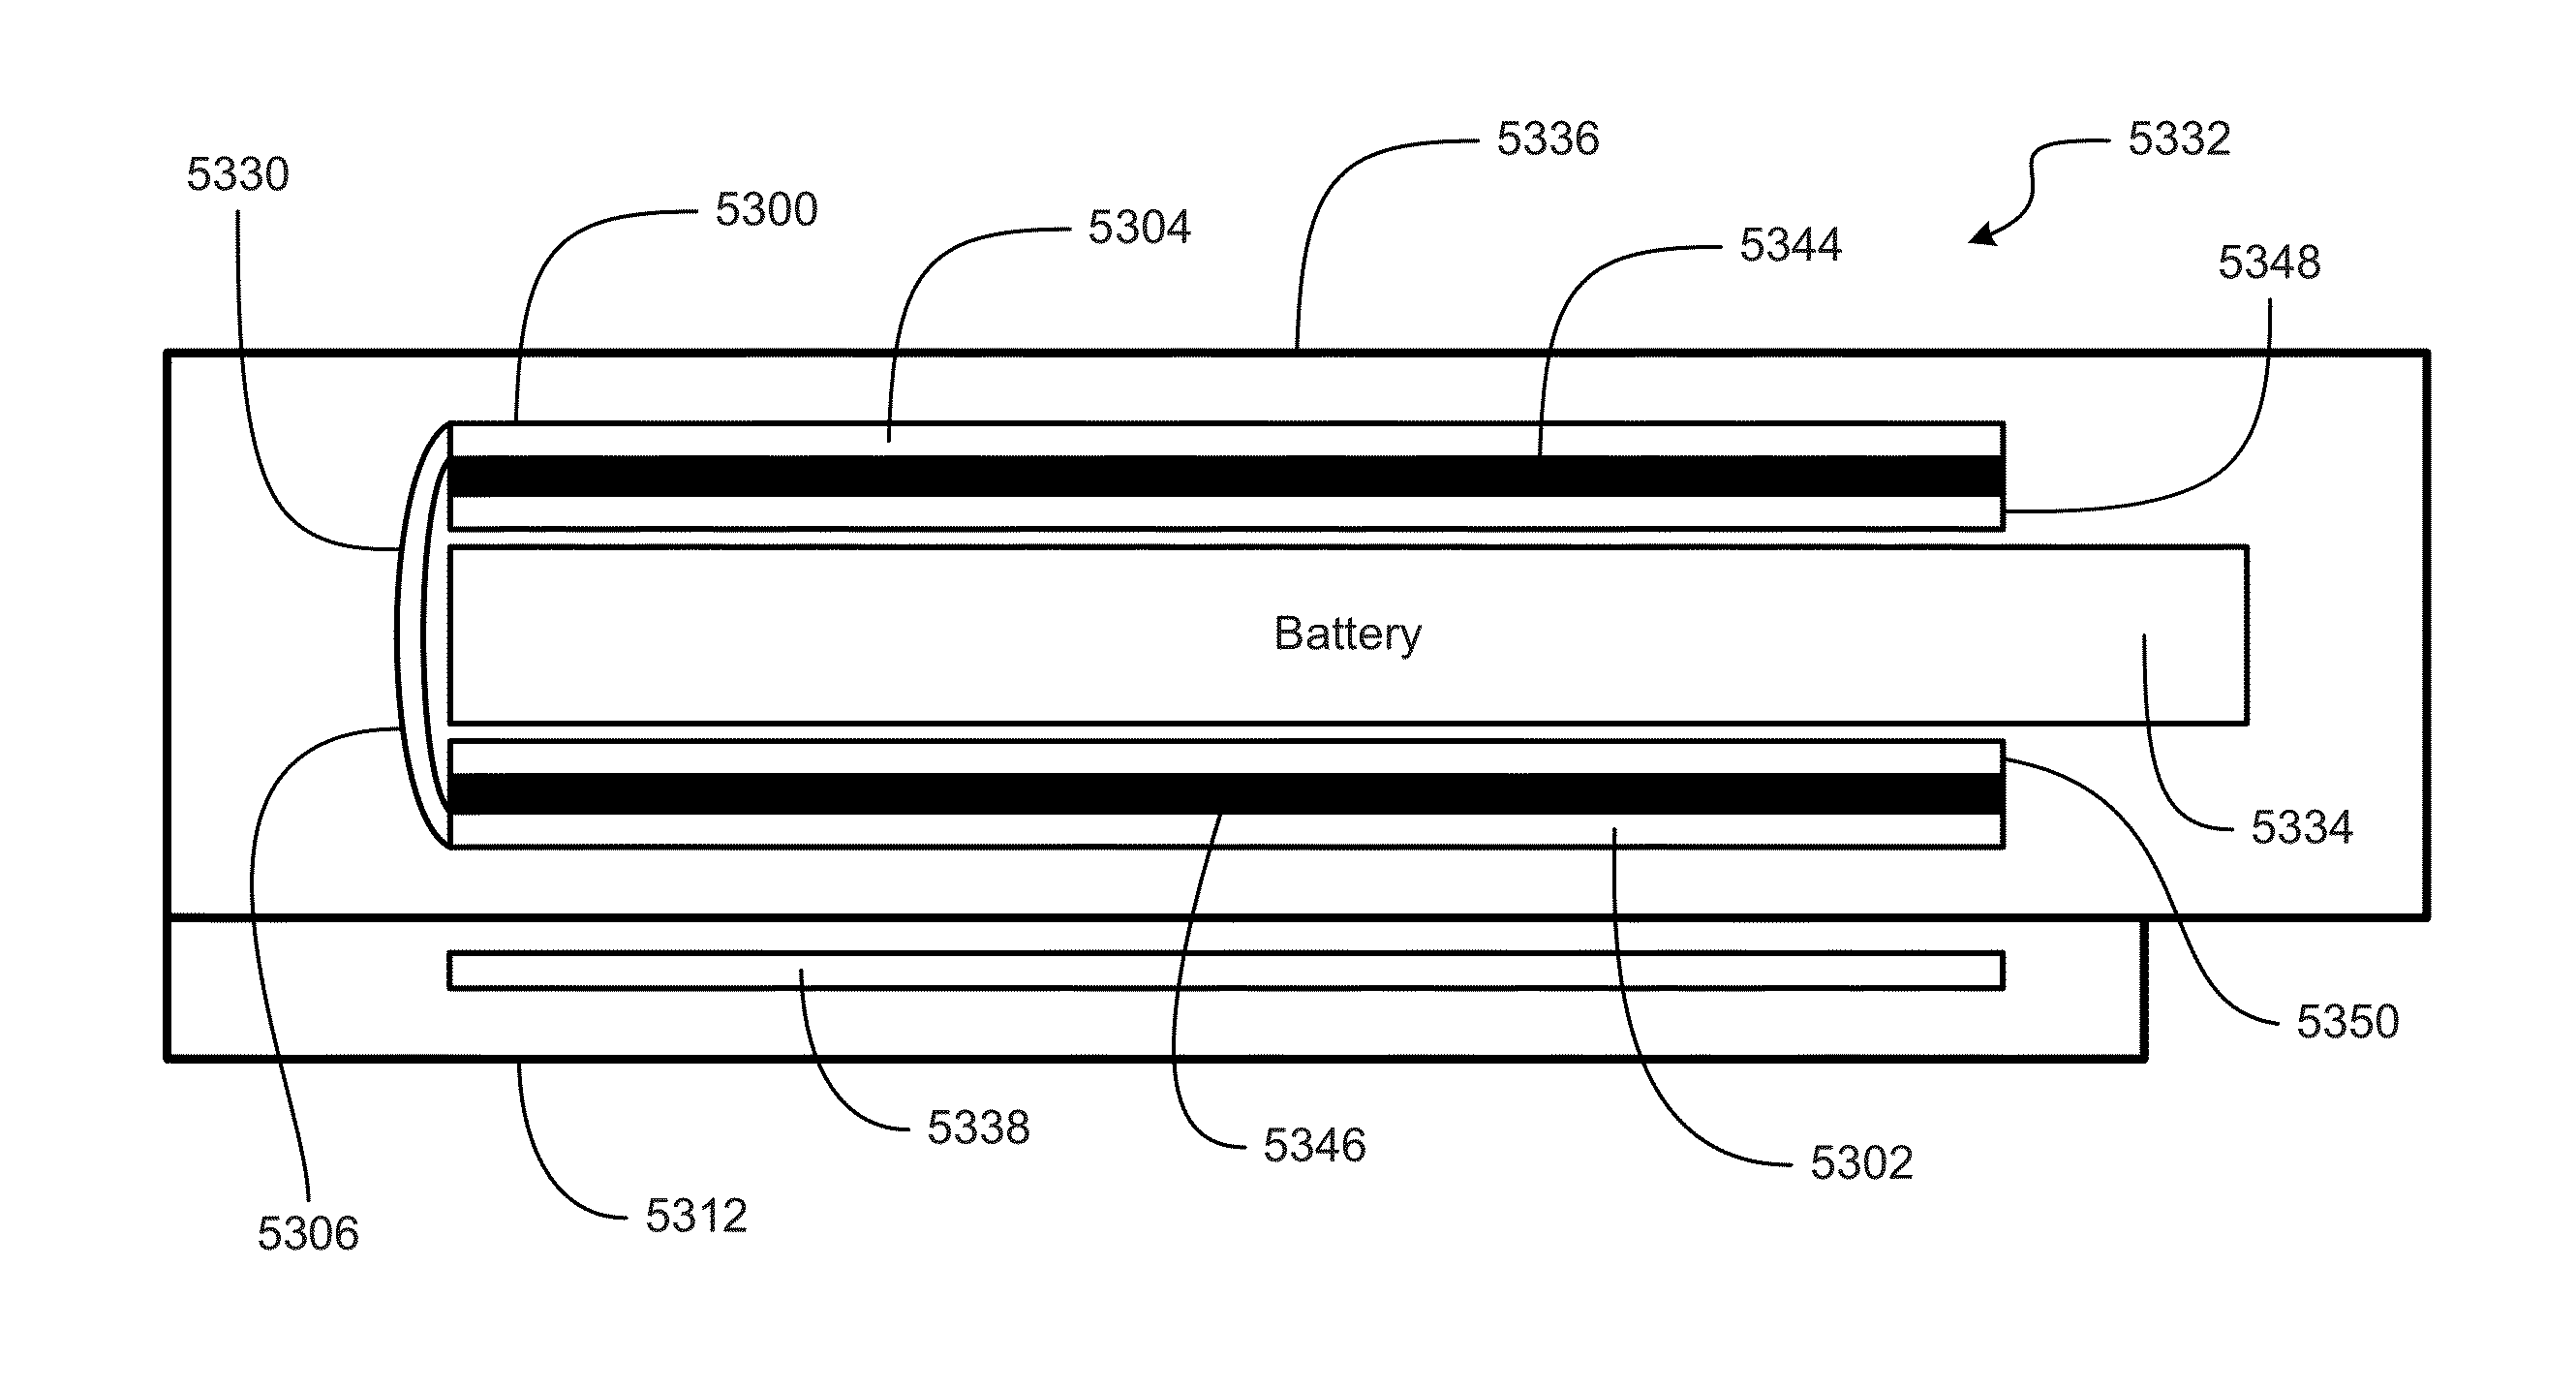 Wireless communication accessory for a mobile device